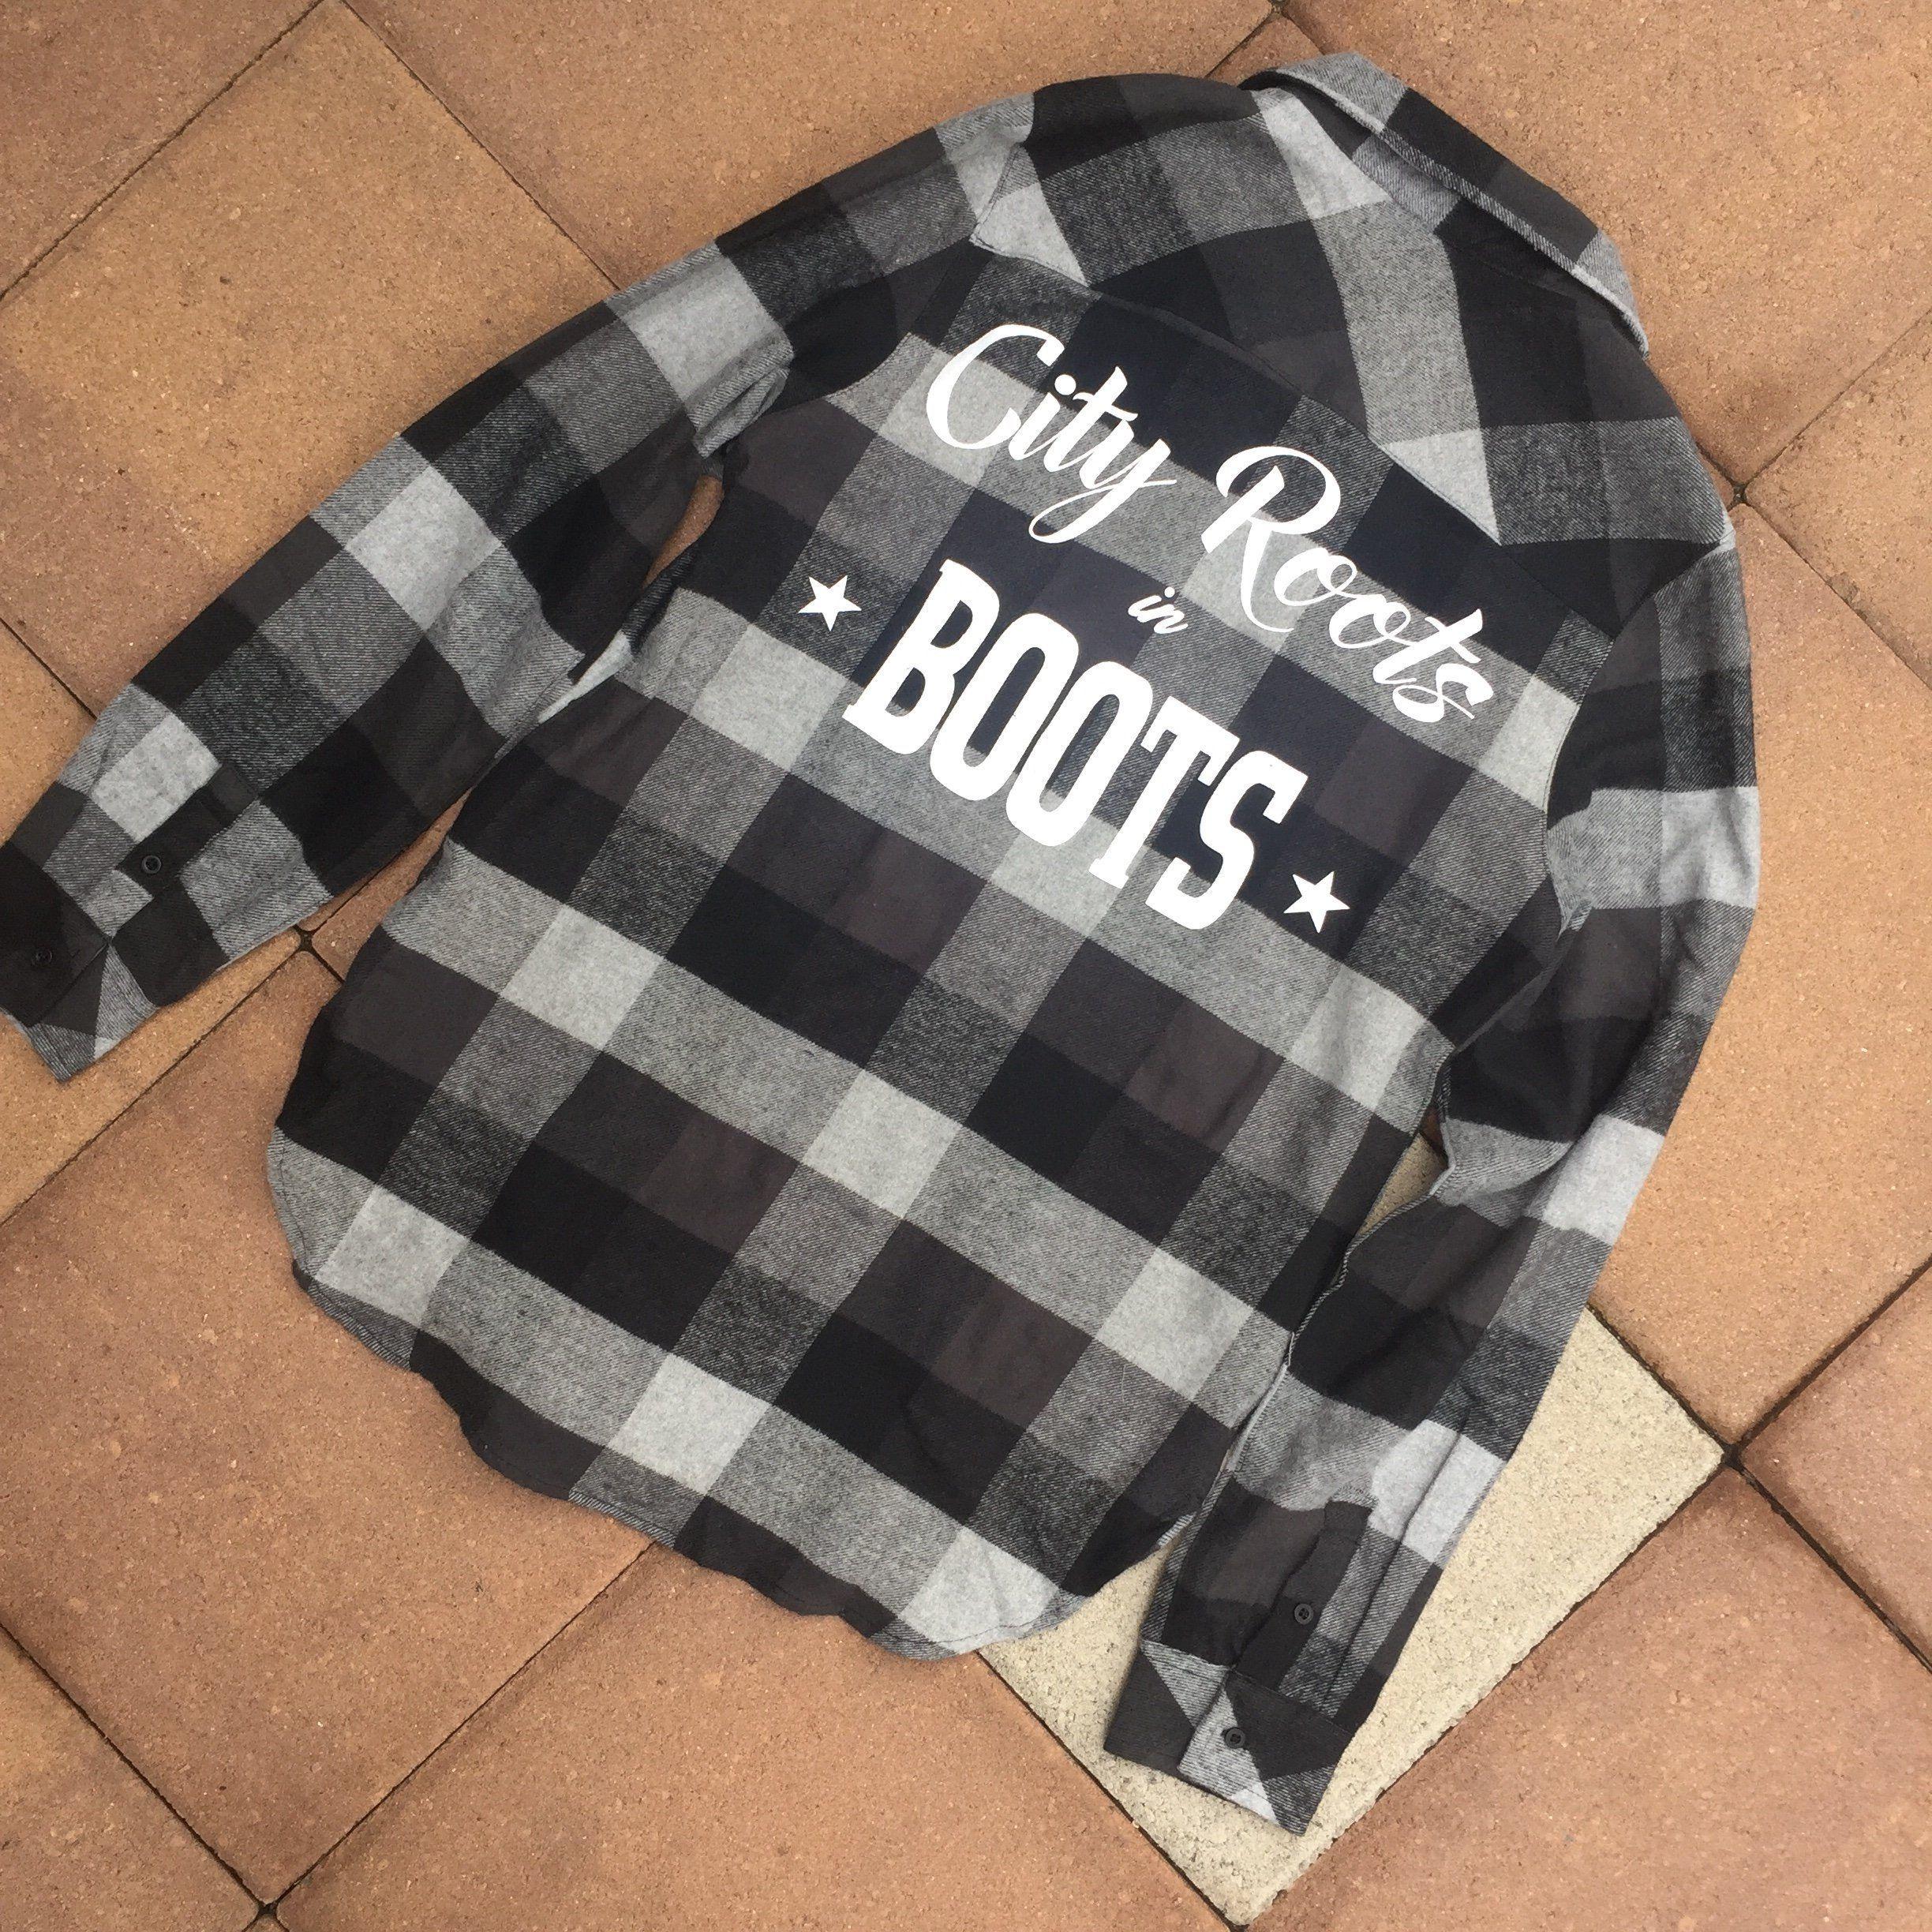 Gray City Logo - City Roots in Boots